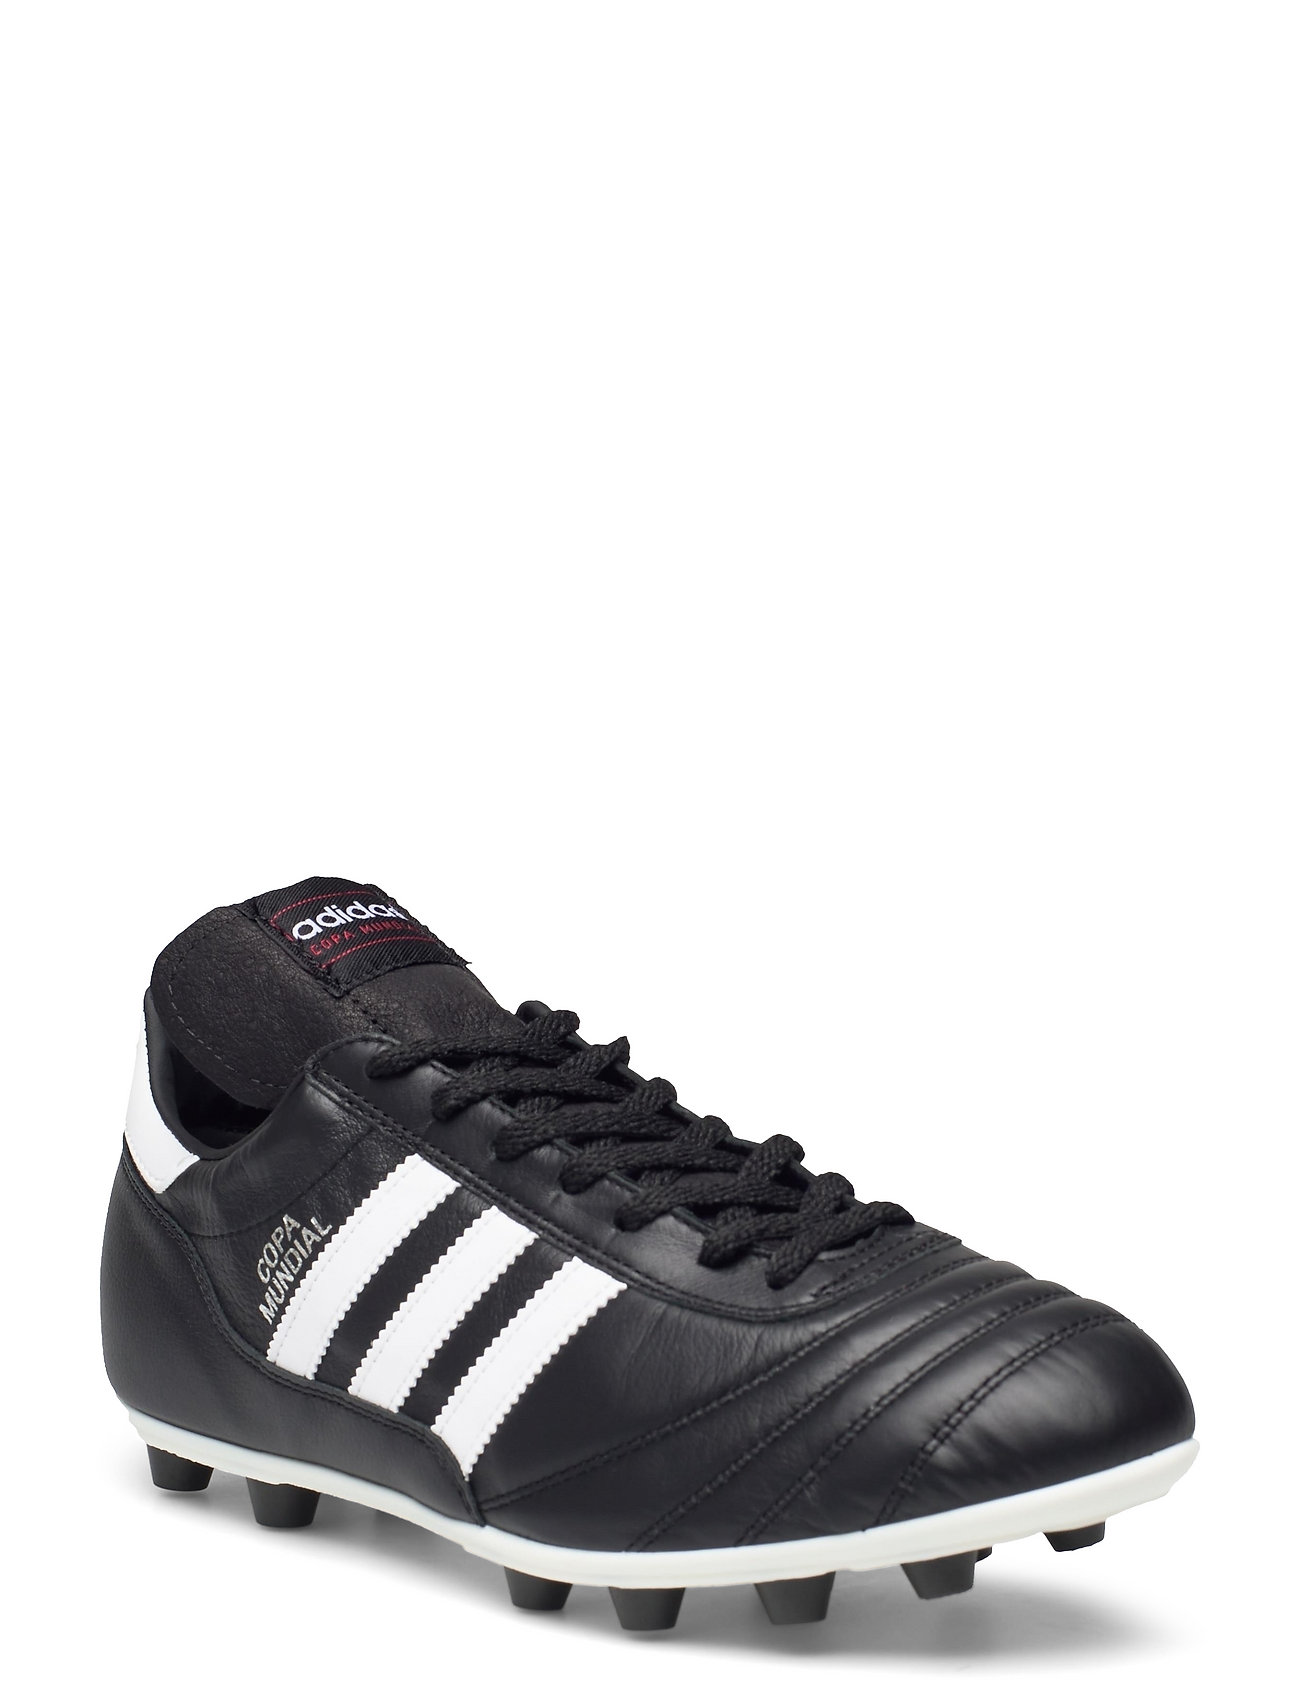 Copa Mundial Shoes Sport Shoes Football Boots Musta Adidas Performance, adidas Performance